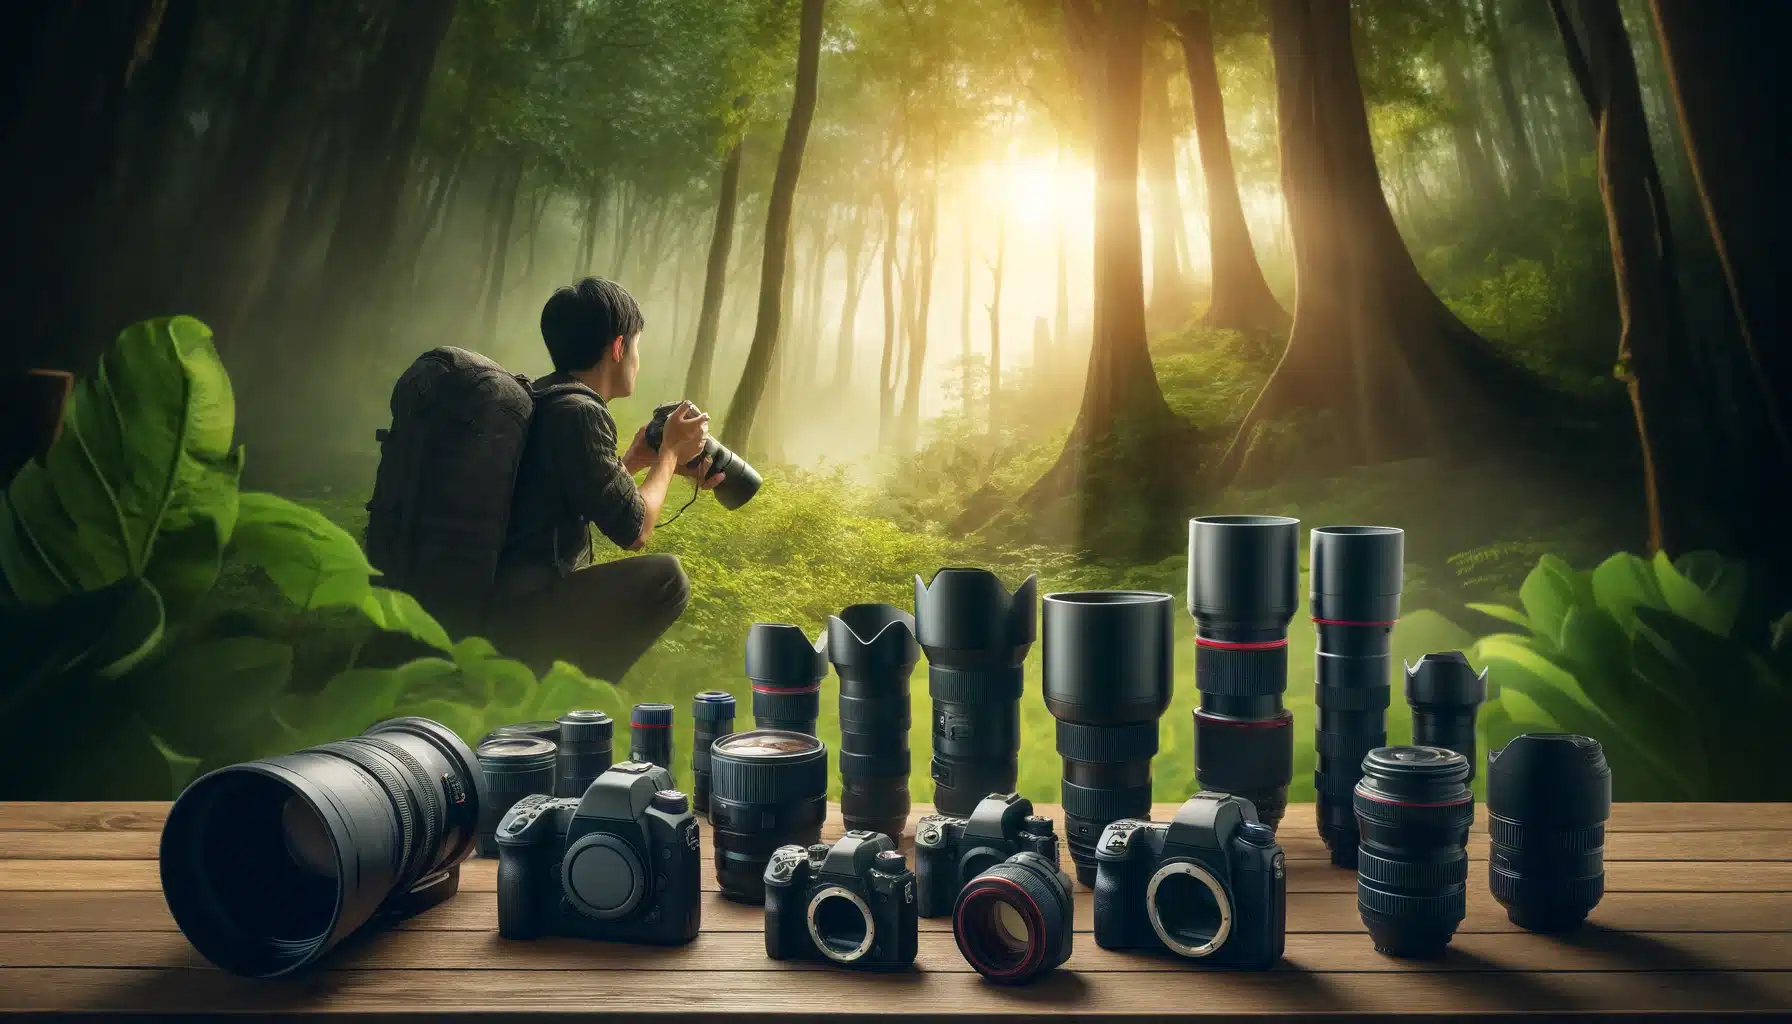 Photographer in a forest examining different Camcorders, with a picking of professional photography equipment laid out nearby.